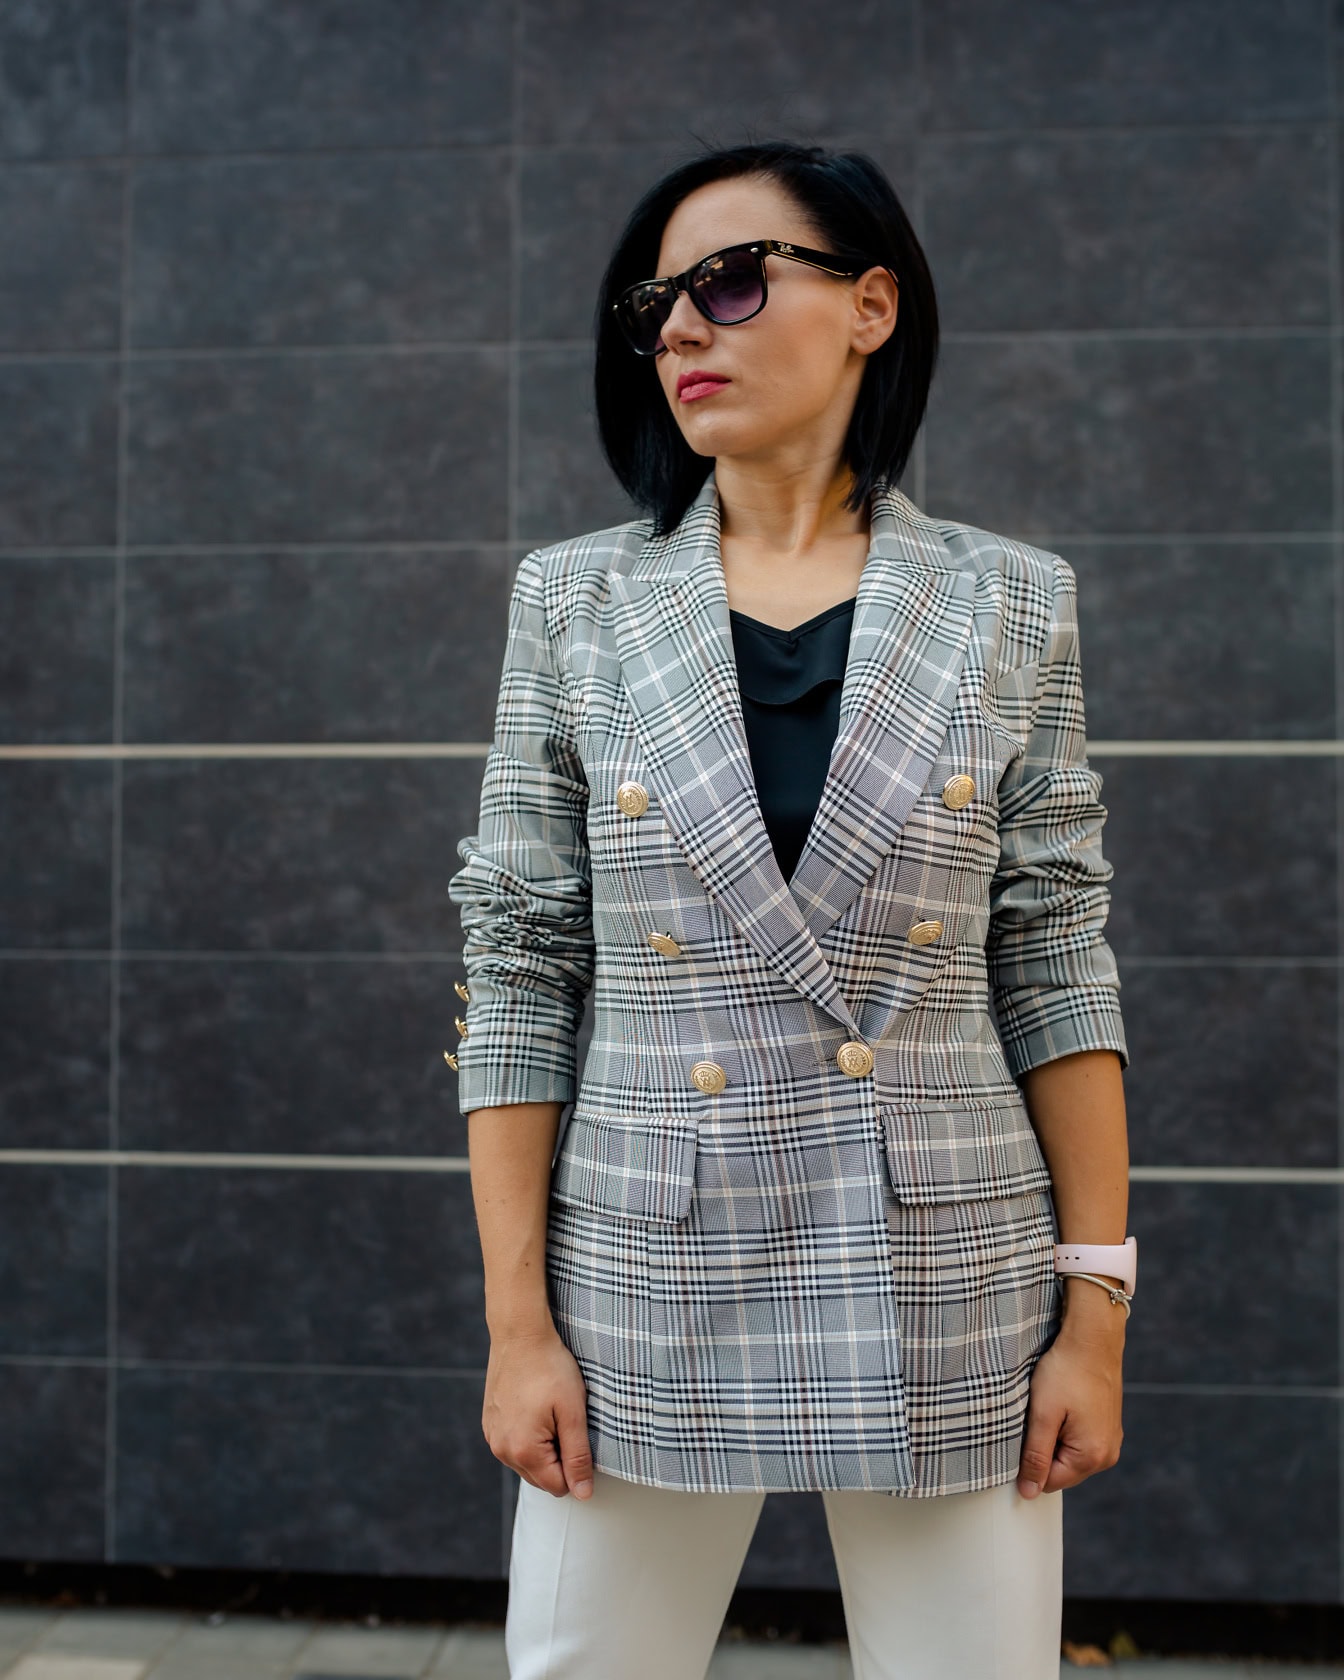 A businesswoman posing while wearing sunglasses and a plaid blazer